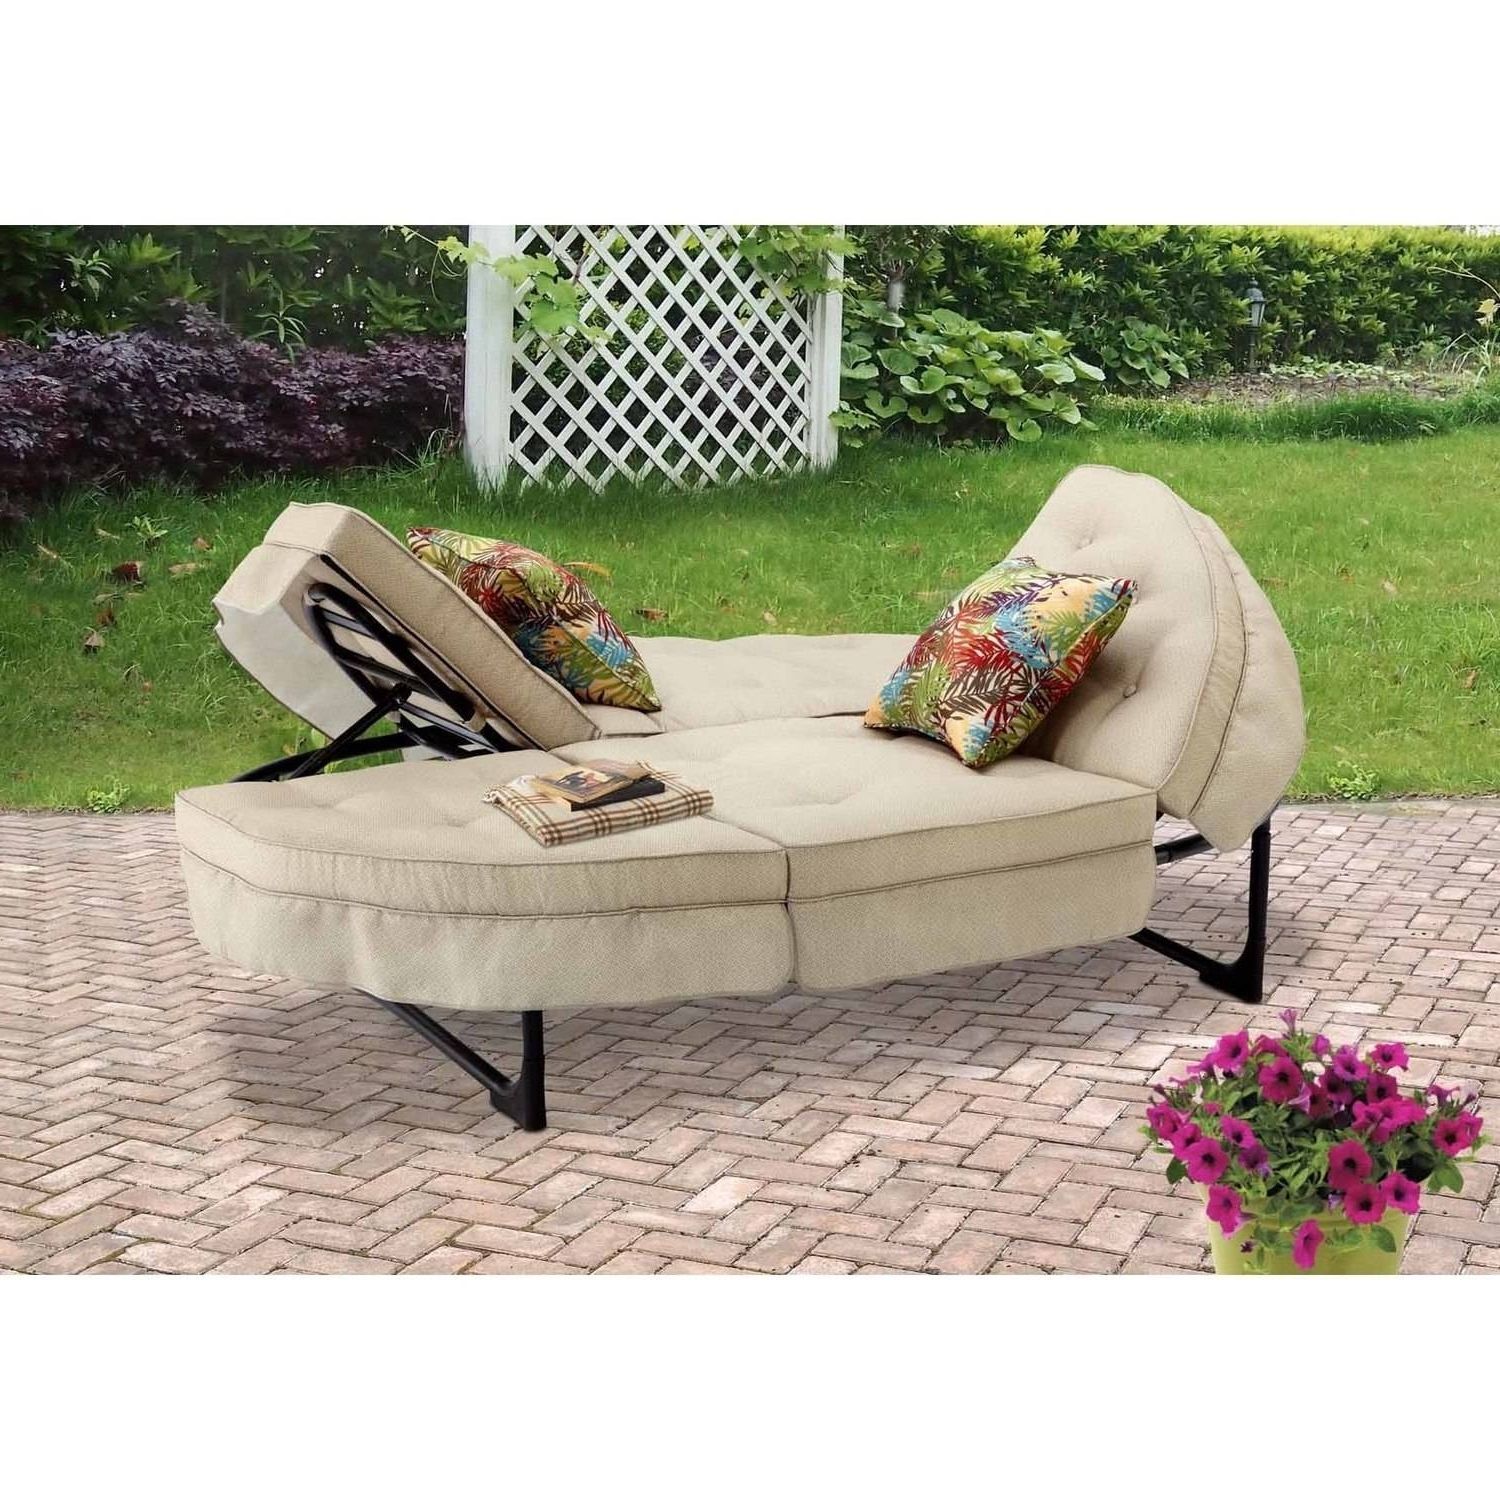 Famous Walmart Outdoor Chaise Lounges Regarding Cosco Outdoor Adjustable Aluminum Chaise Lounge Chair Serene Ridge (View 14 of 15)